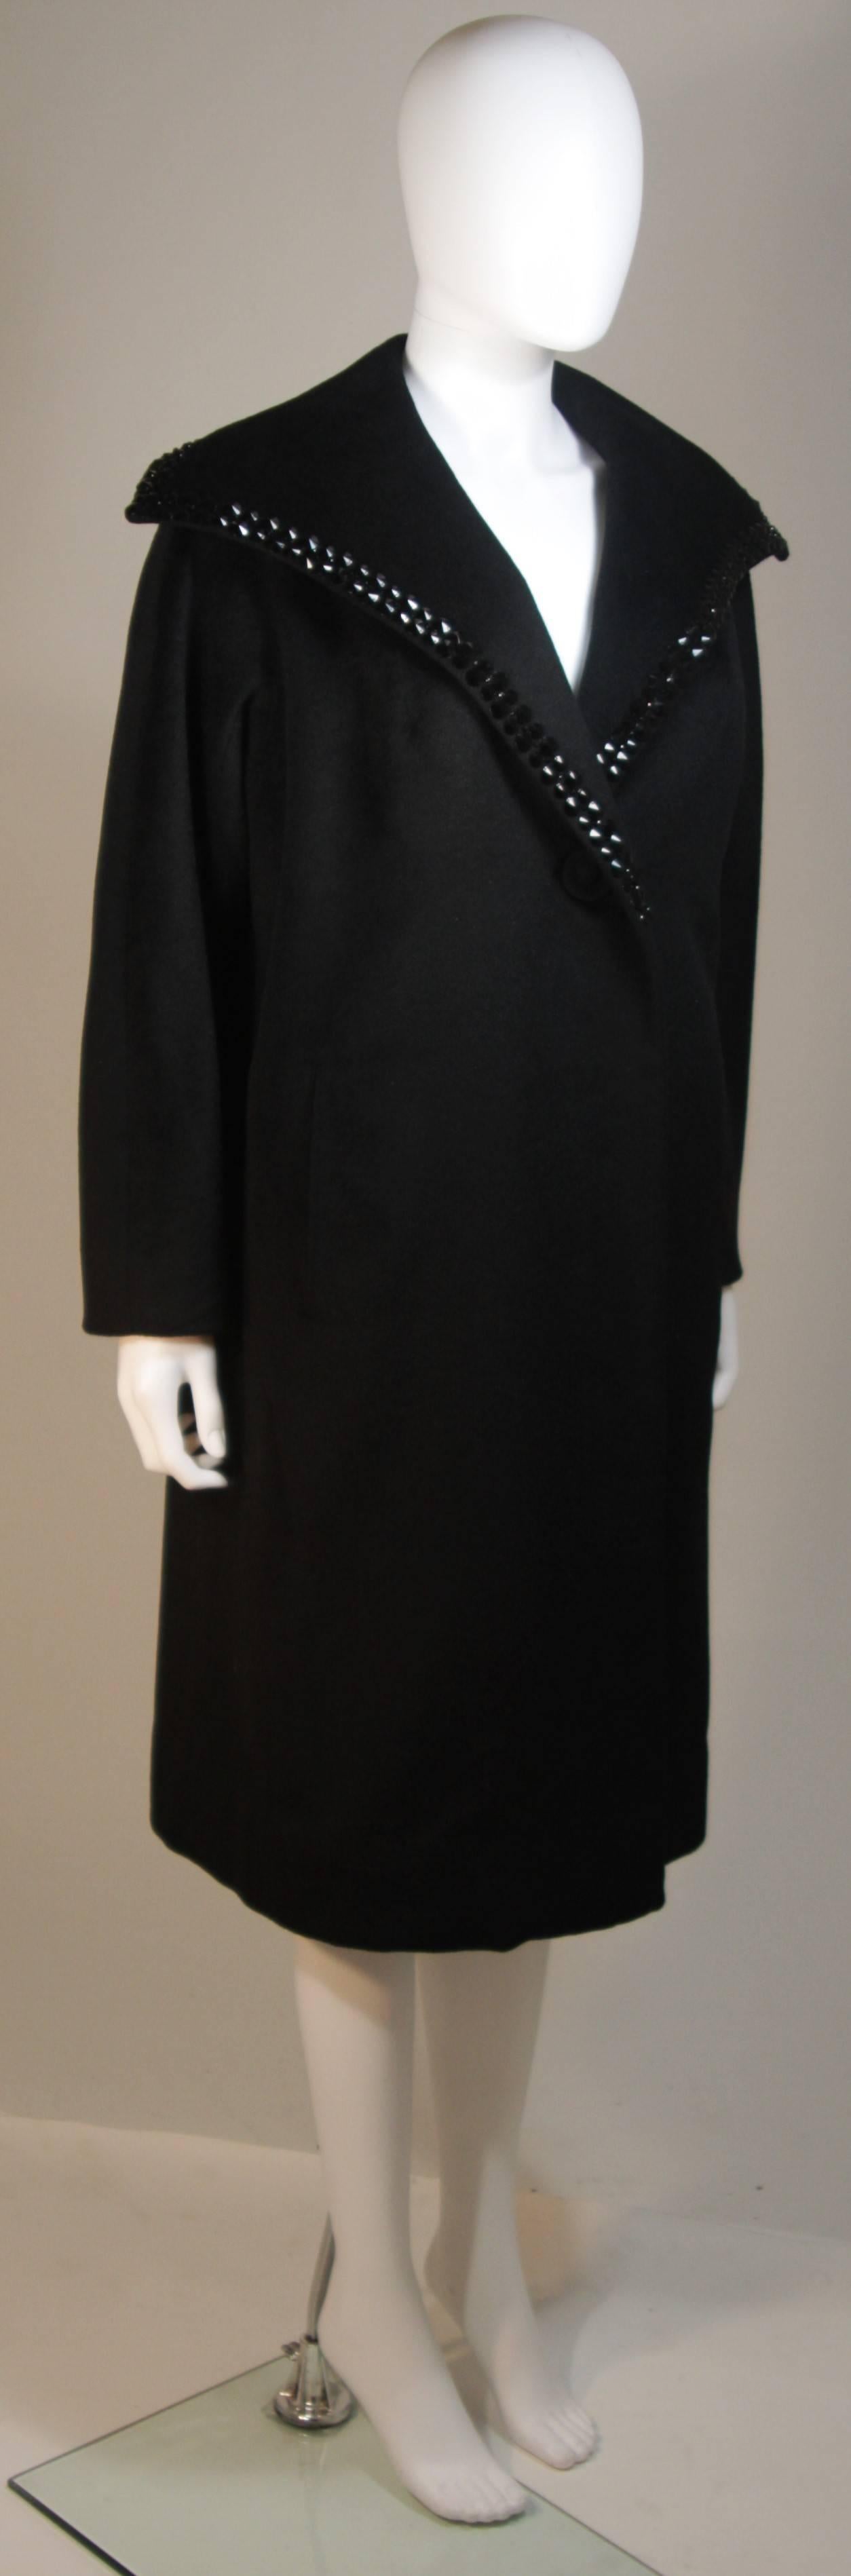 Black McCALLS CO. VOGUE TAILOR Vintage Wool Coat with Studded Collar Size Medium For Sale